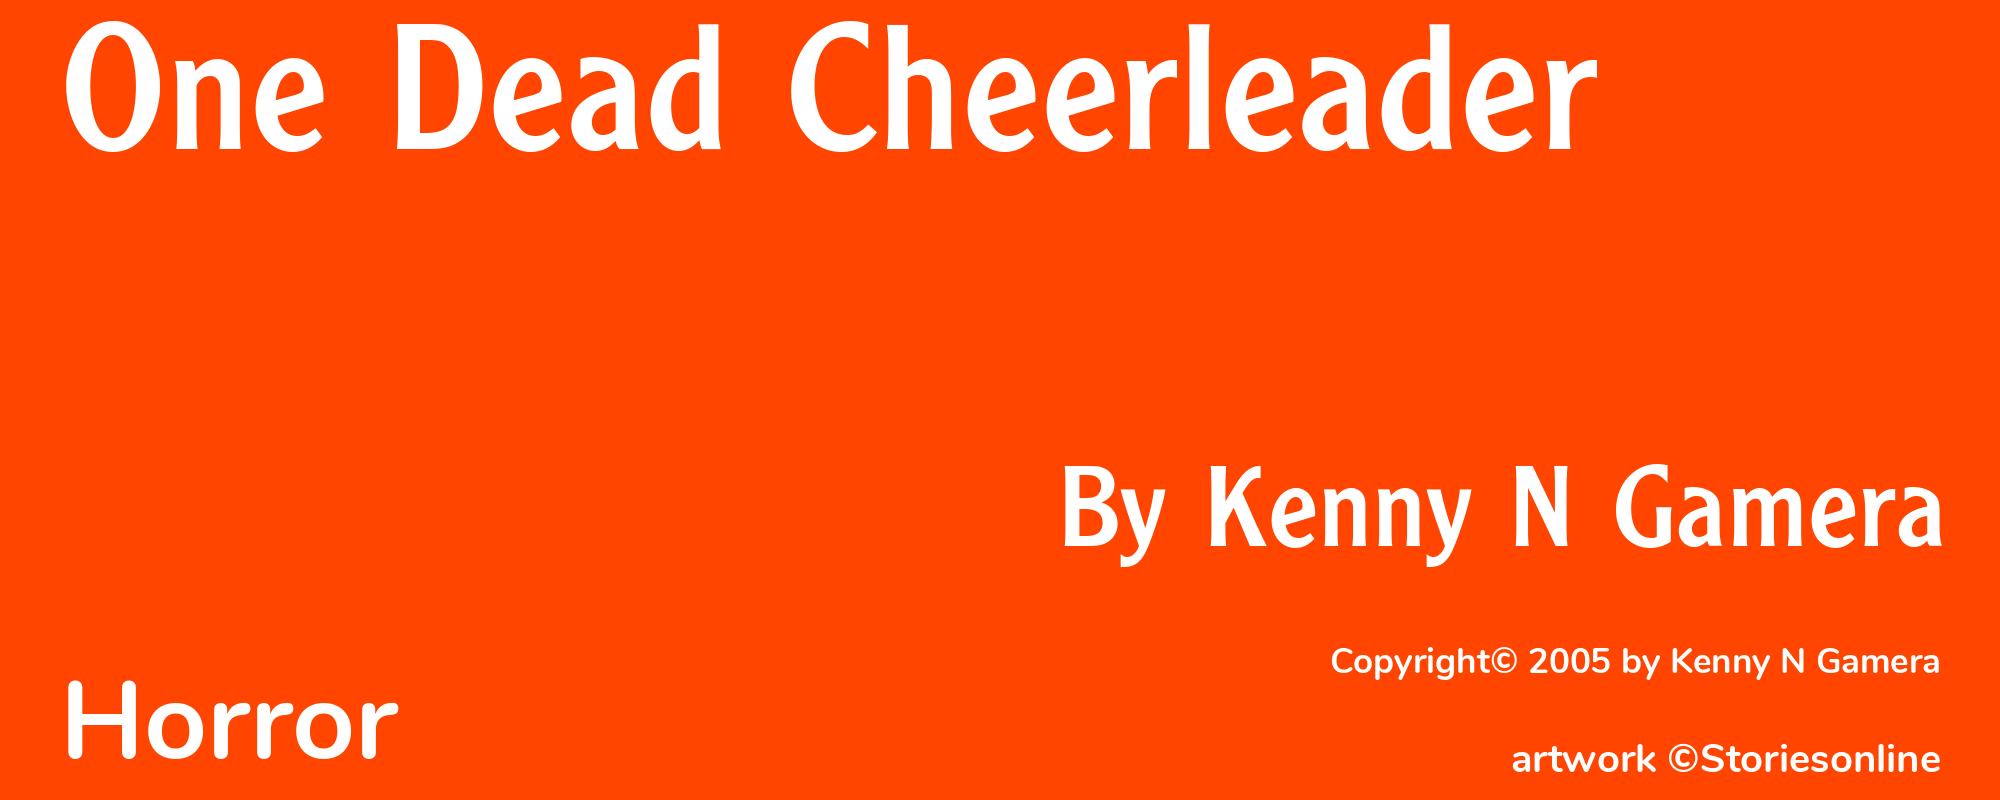 One Dead Cheerleader - Cover